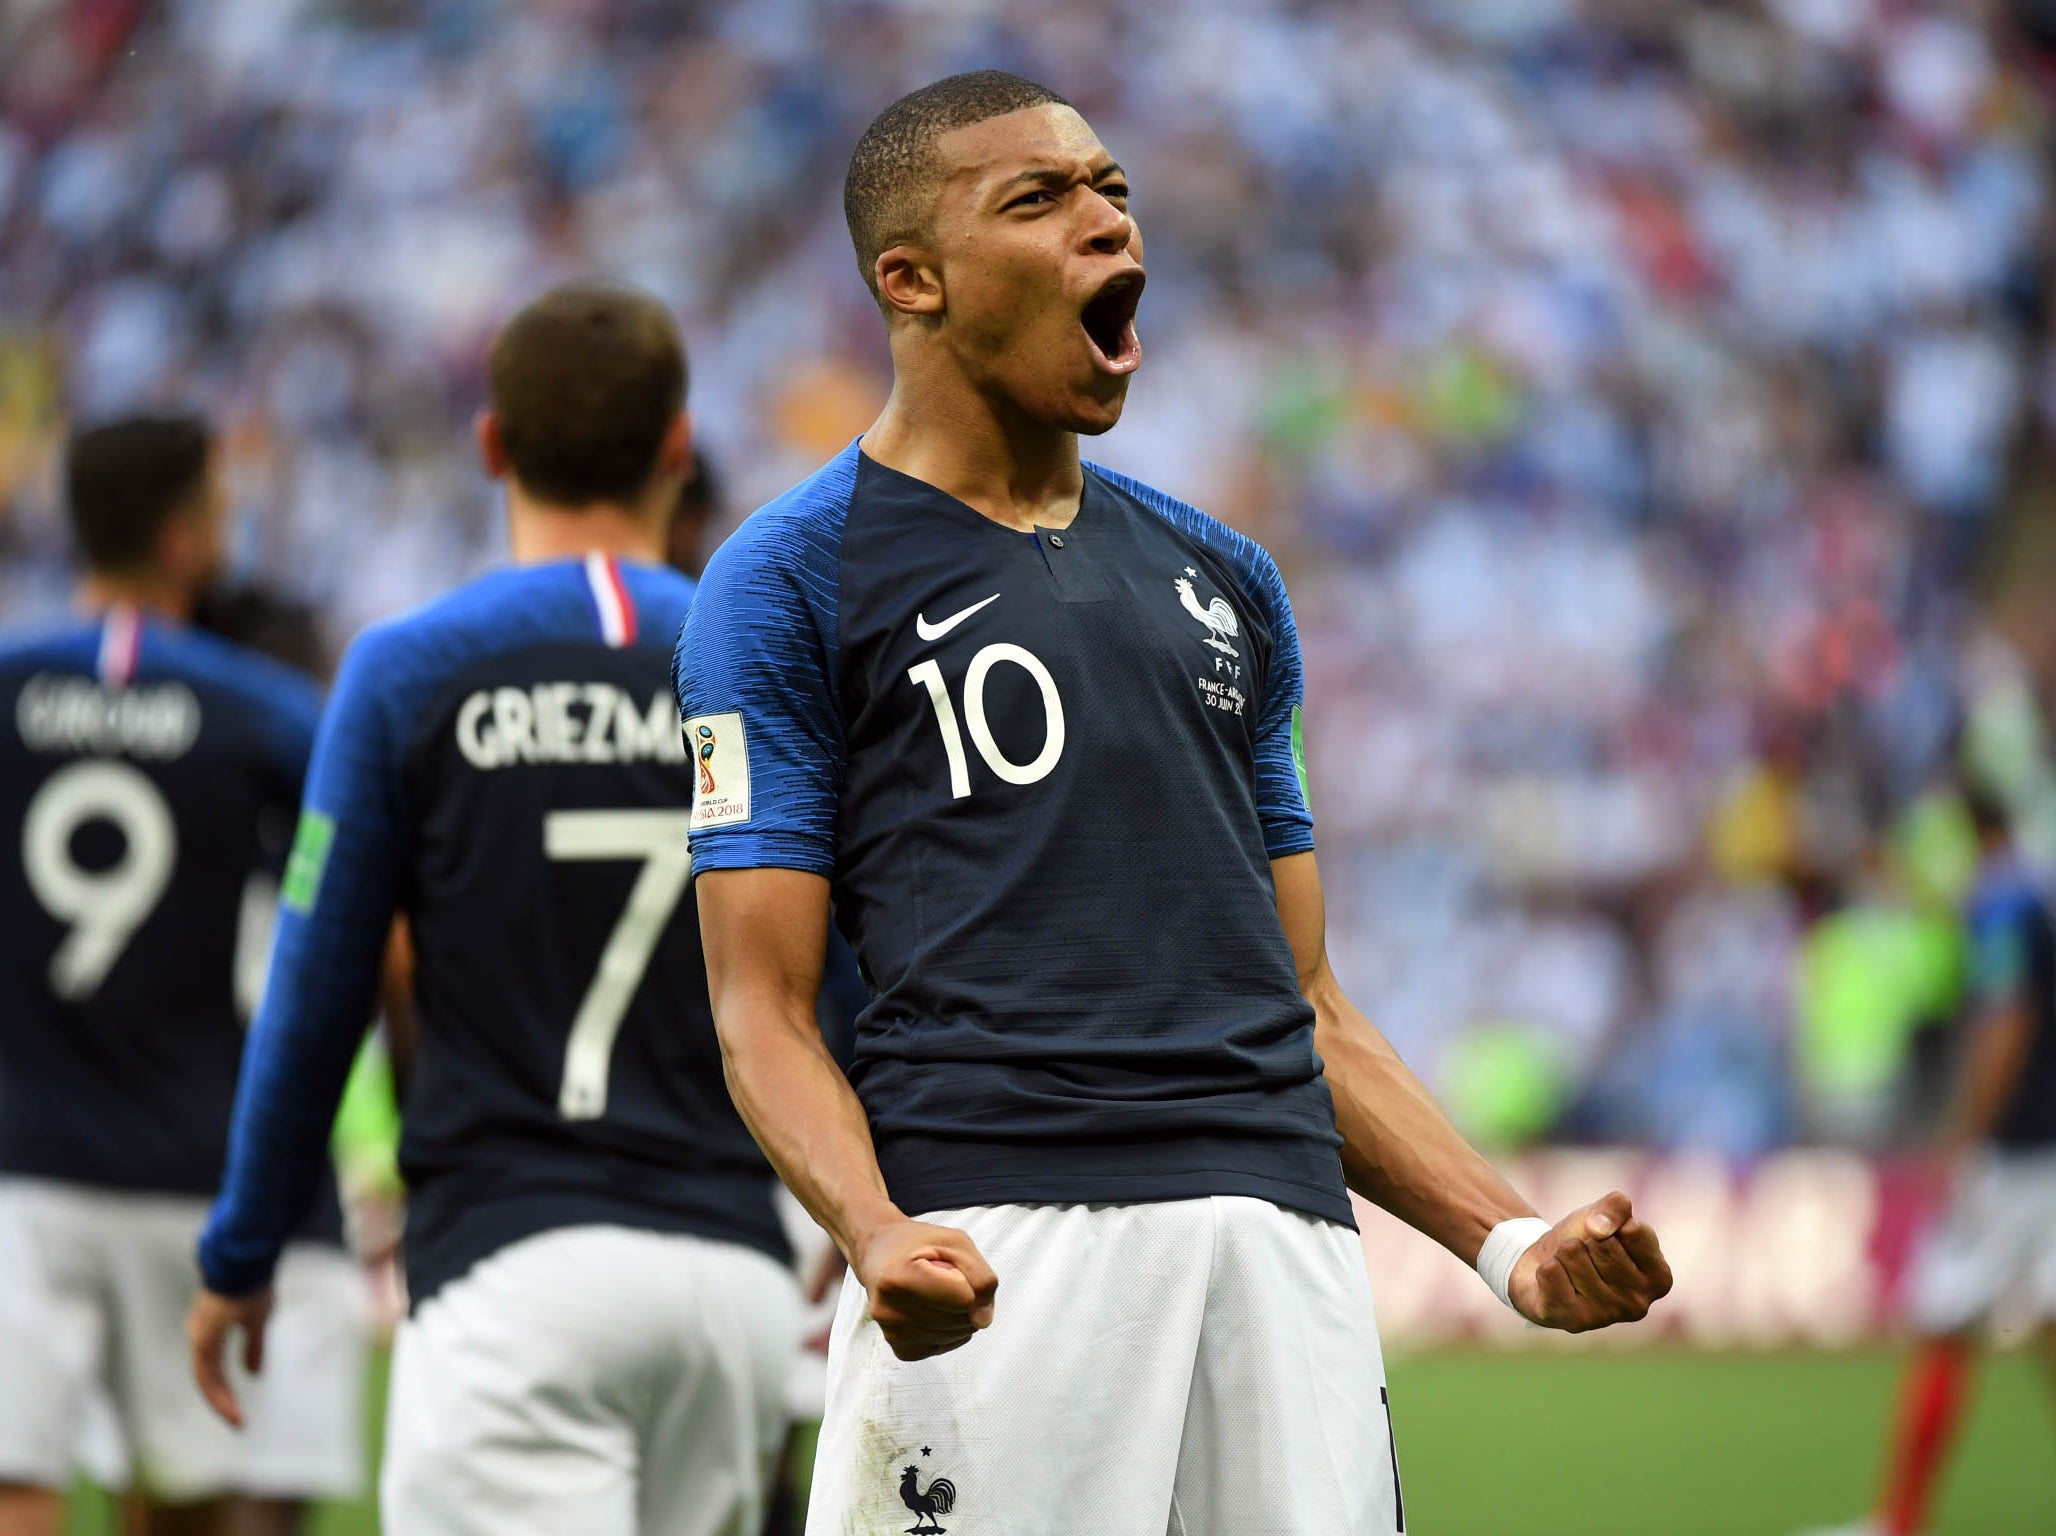 How will it get any better than this for Mbappe?